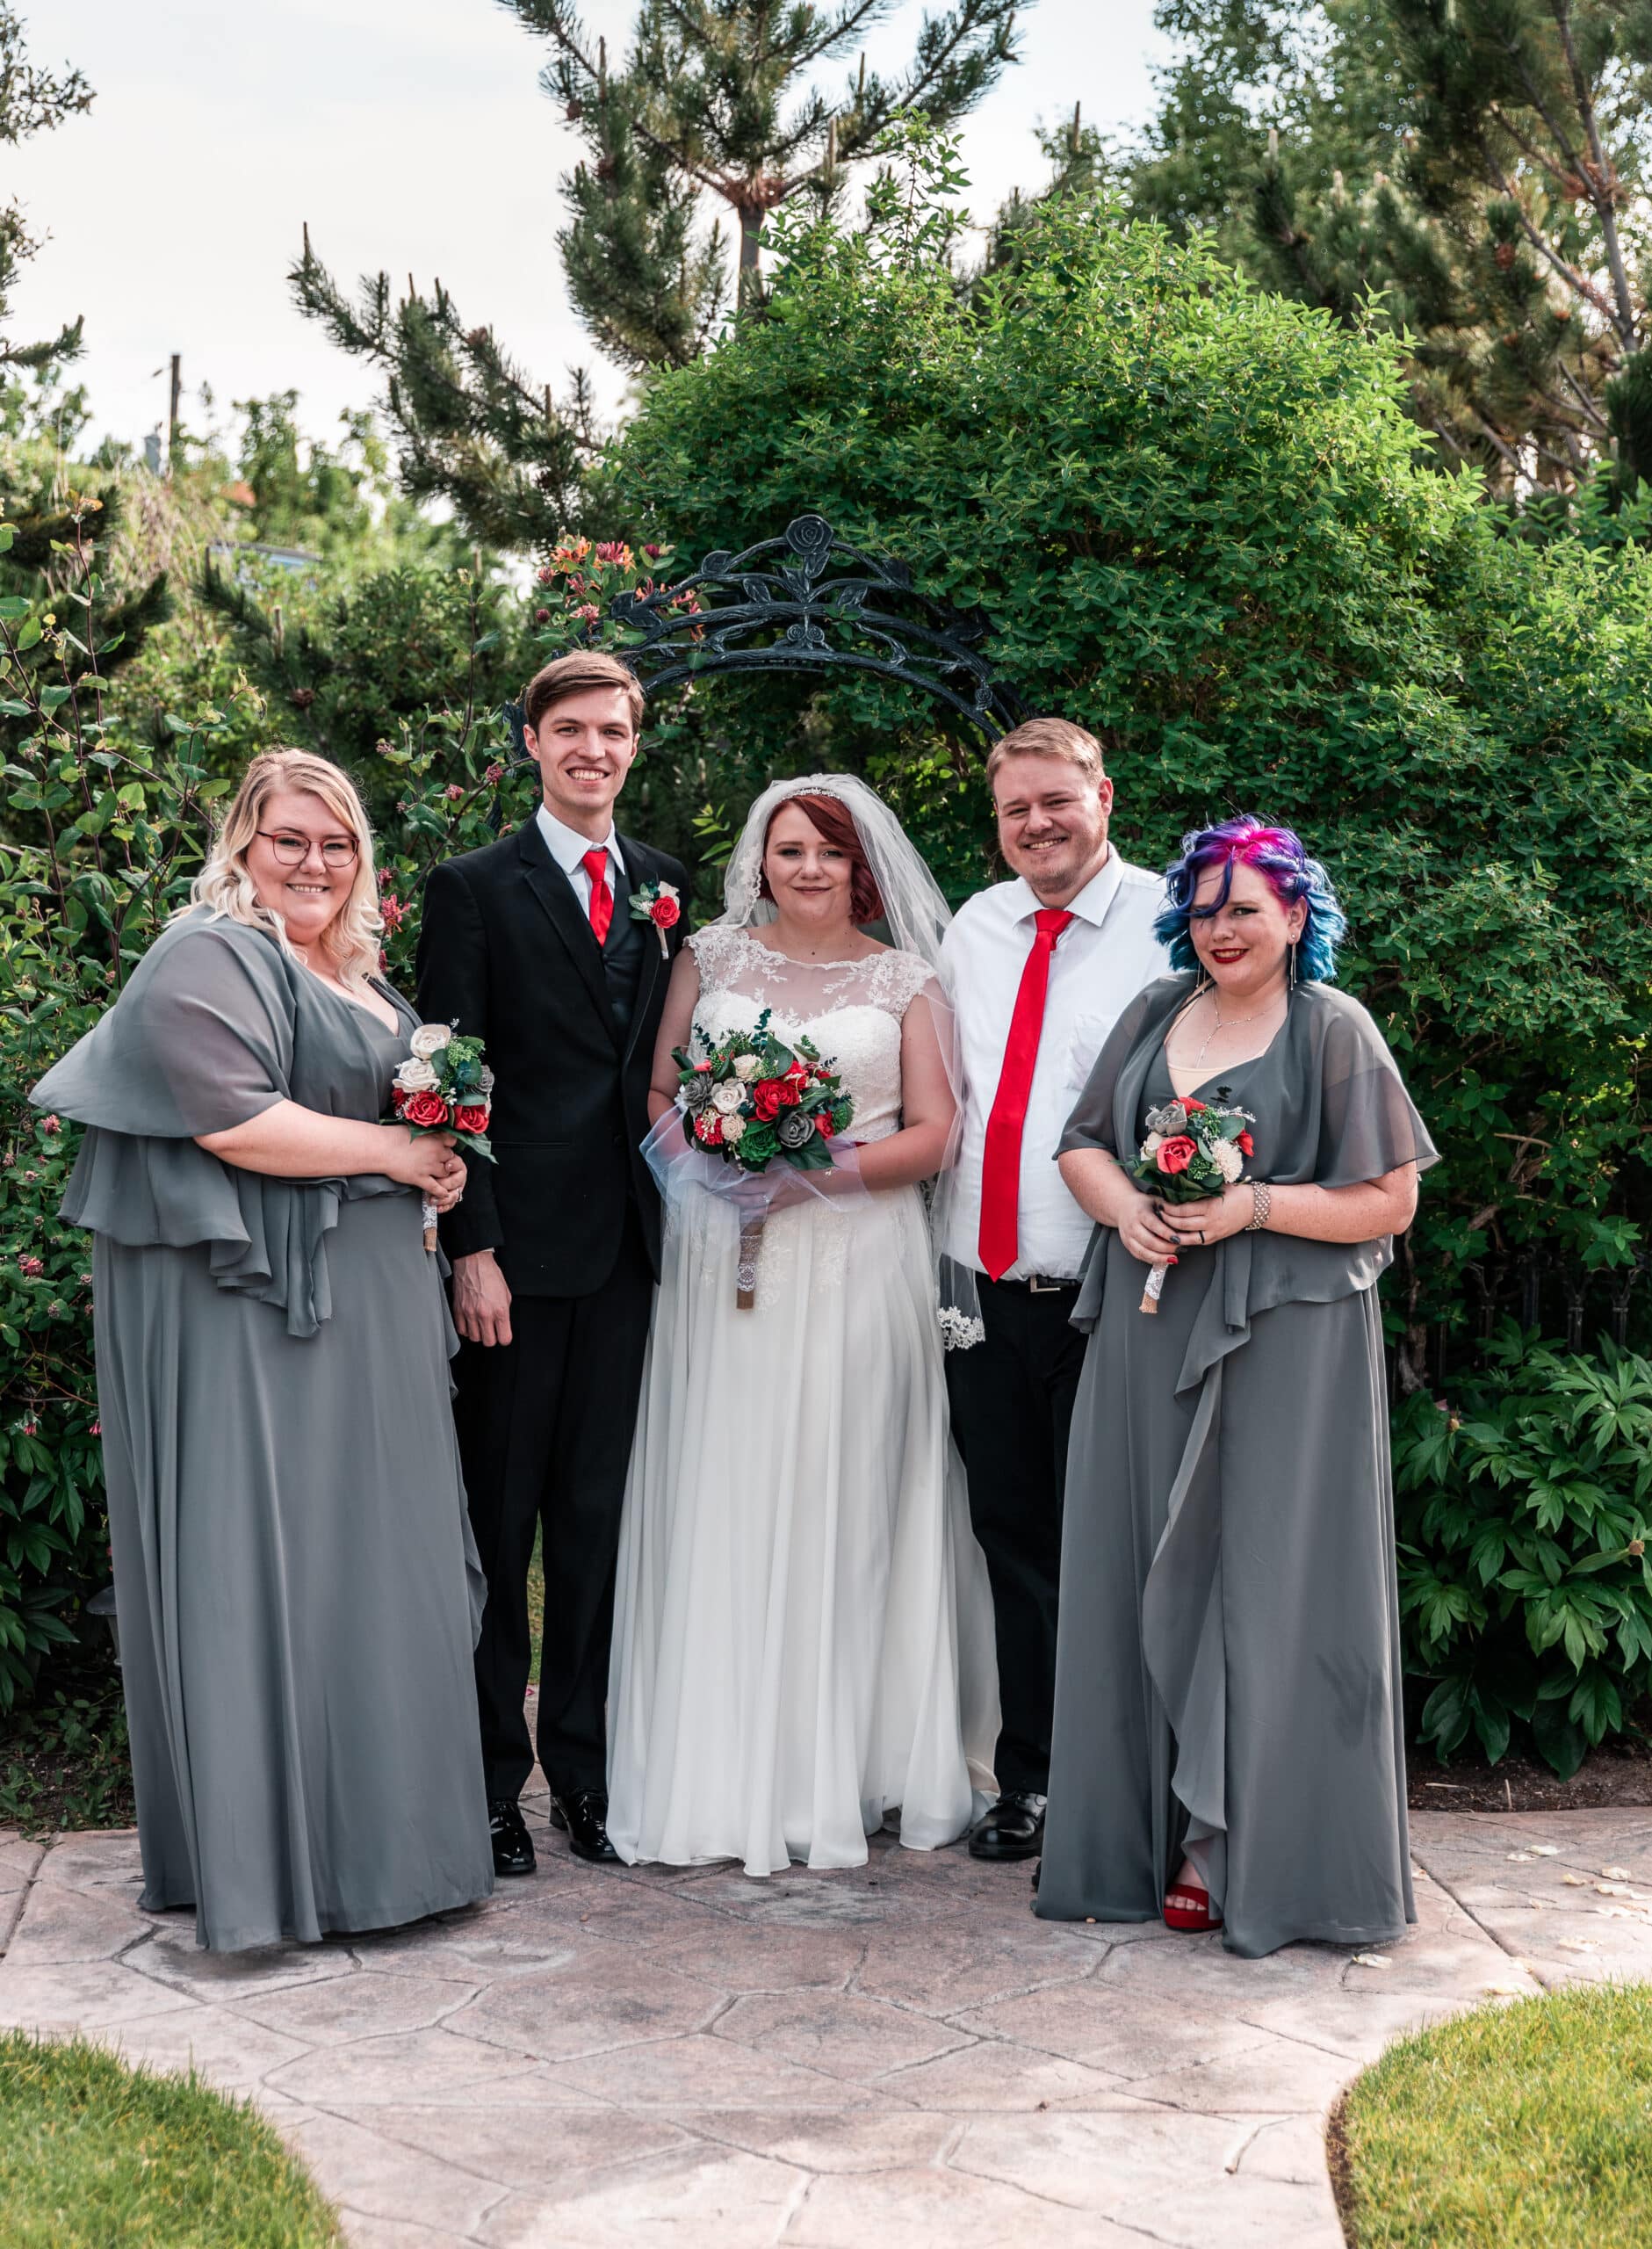 Rachael (right), at Caitlin and Evan’s wedding (center) with her half-siblings Spencer and Chrissy